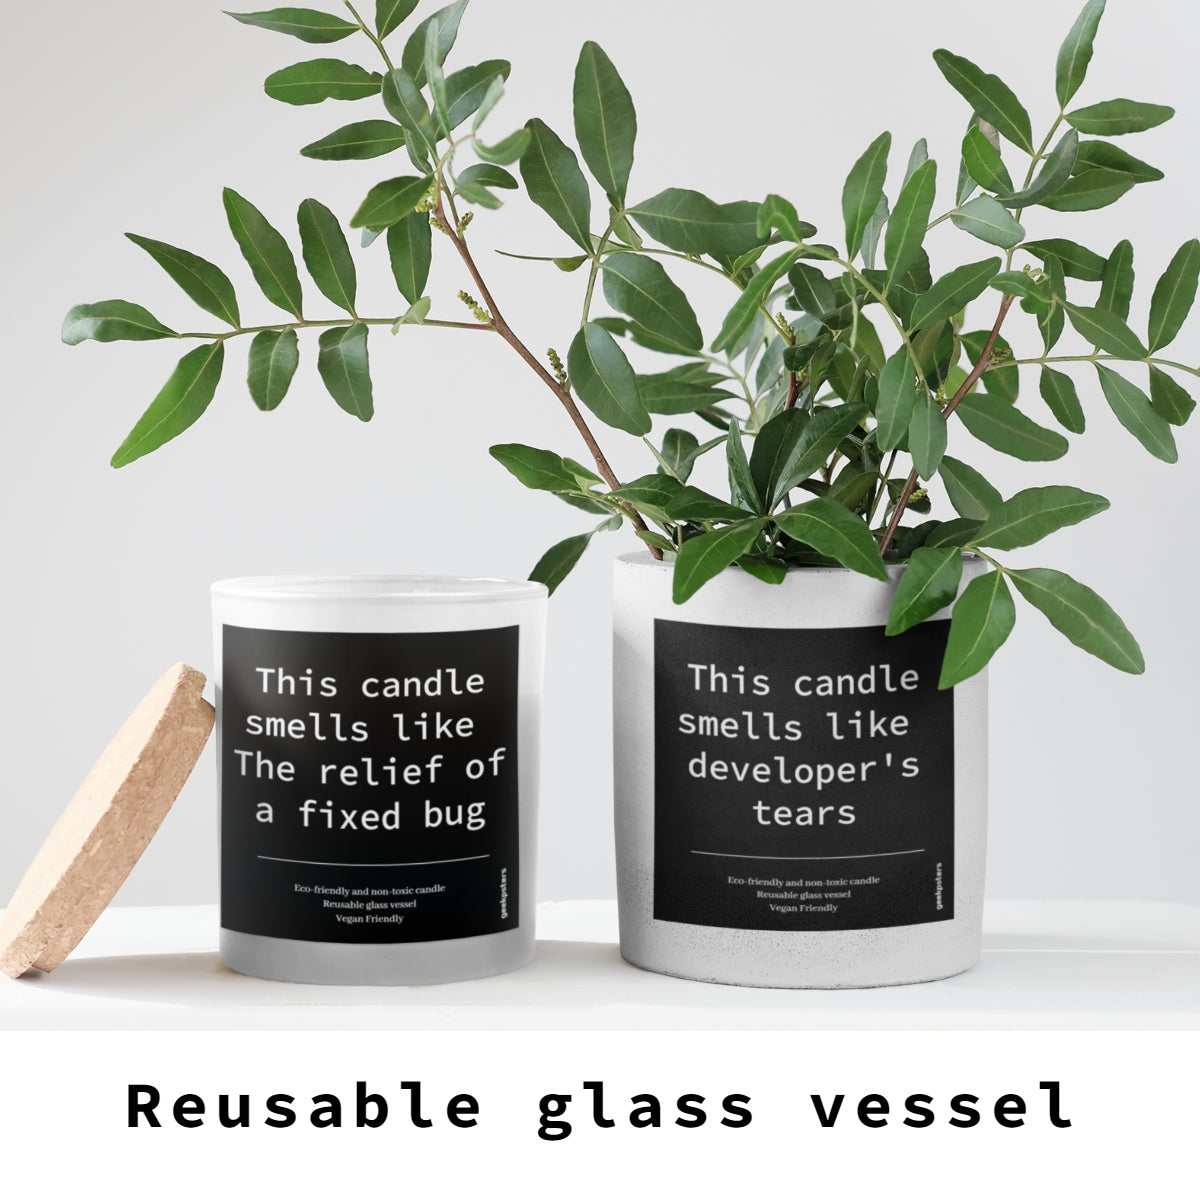 Two "This Candle Smells Like The Relief of a Fixed Bug" soy candles in reusable glass jars with humorous labels, one about a fixed bug relief and another about developer's tears, beside a green plant and a piece of wood.